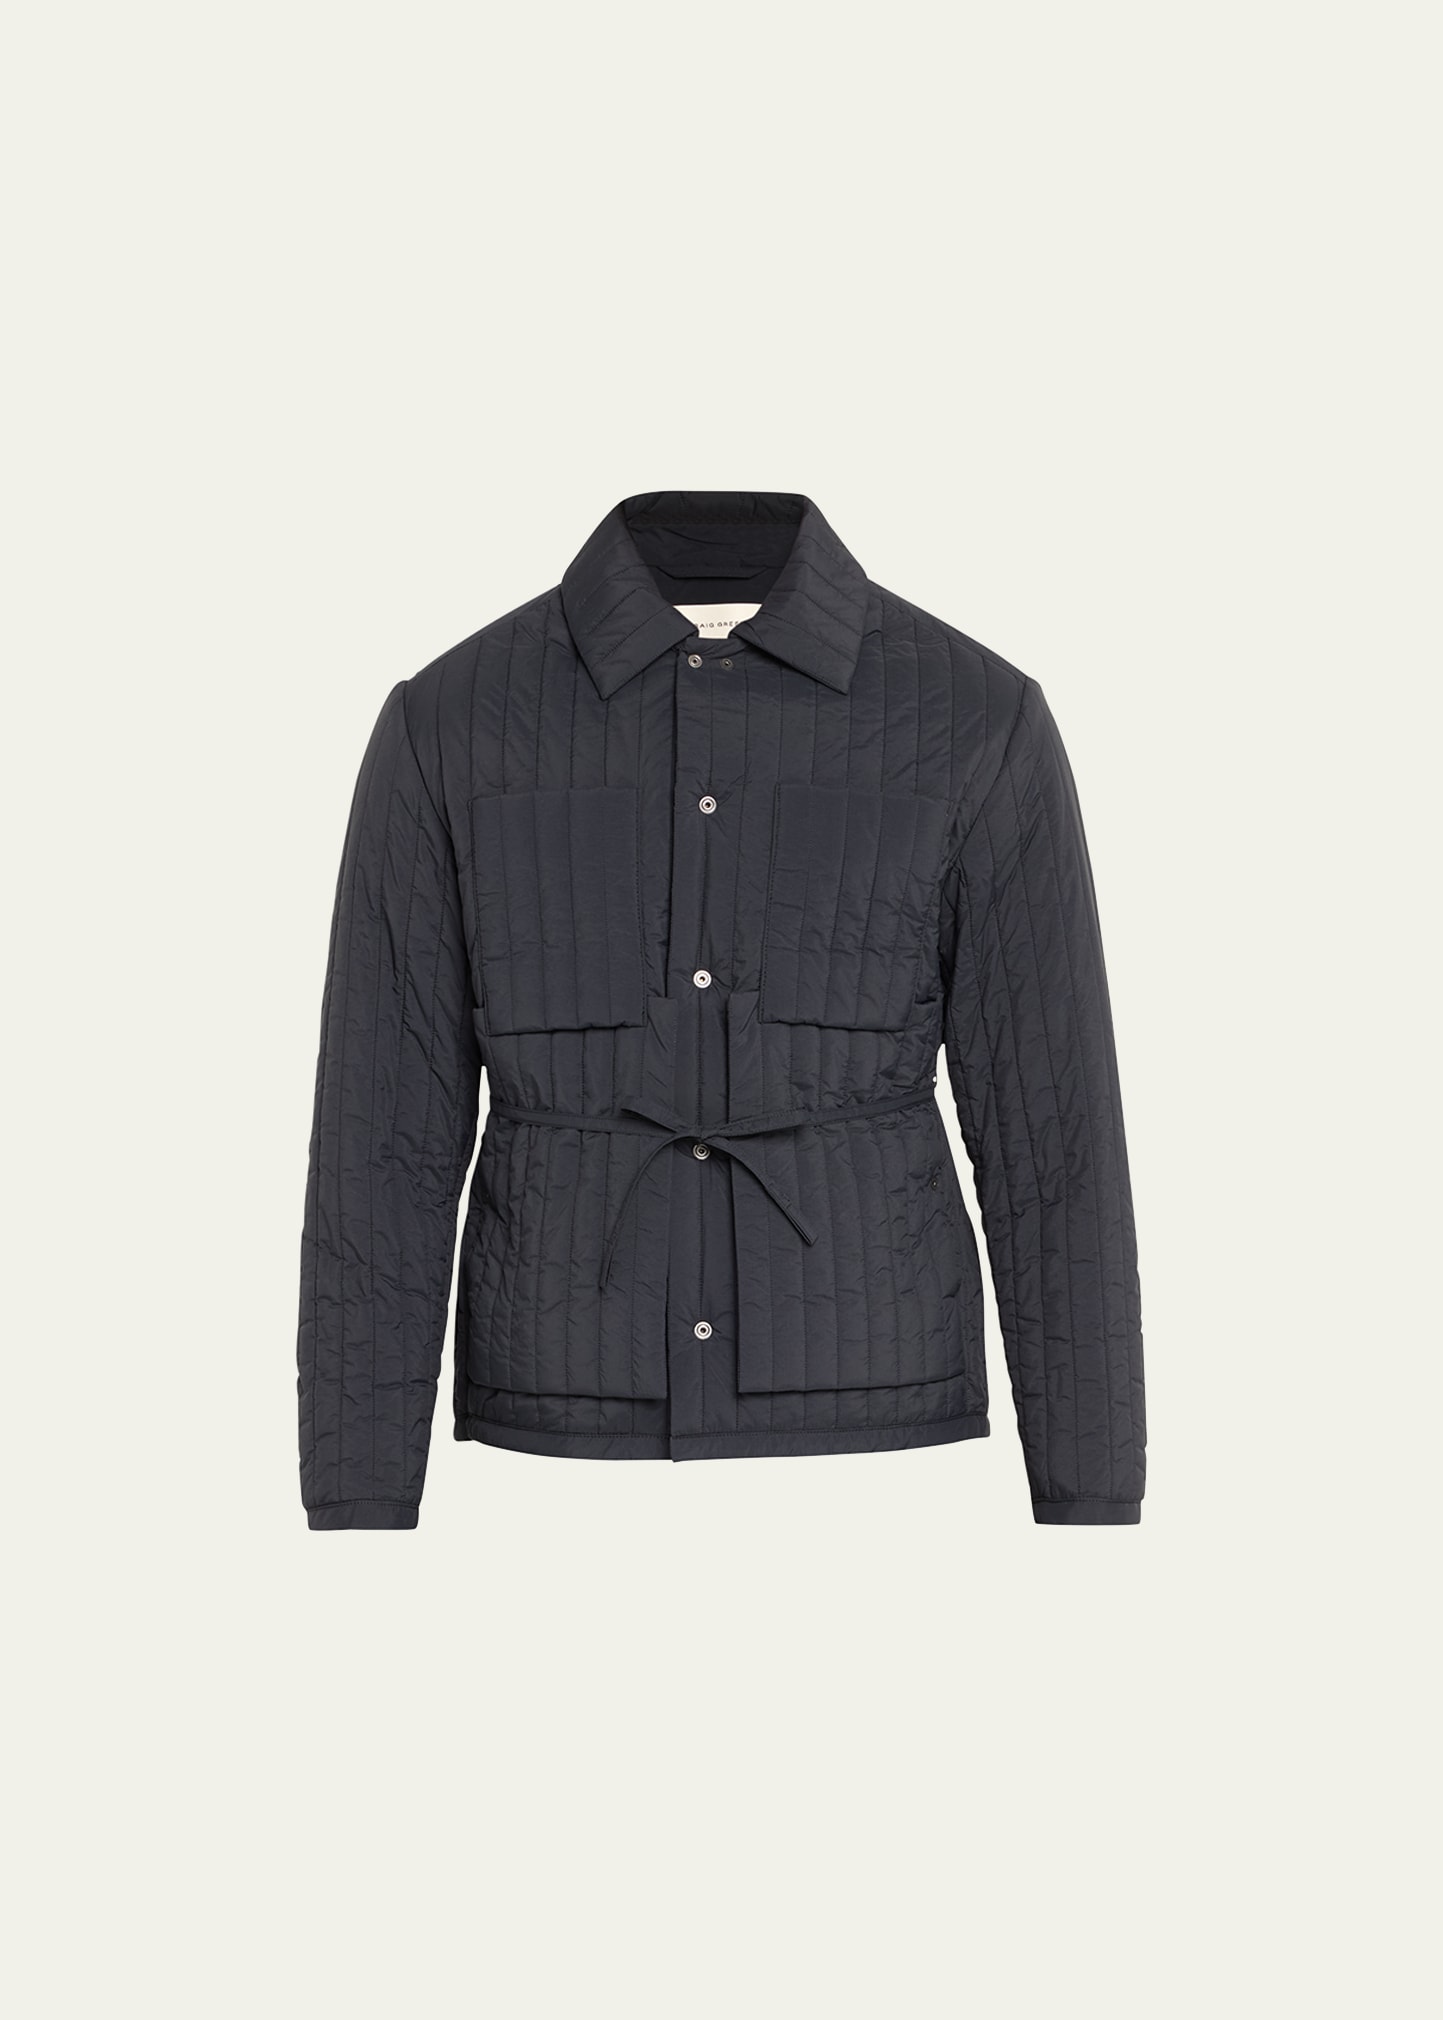 Men's Classic Quilted Worker Jacket